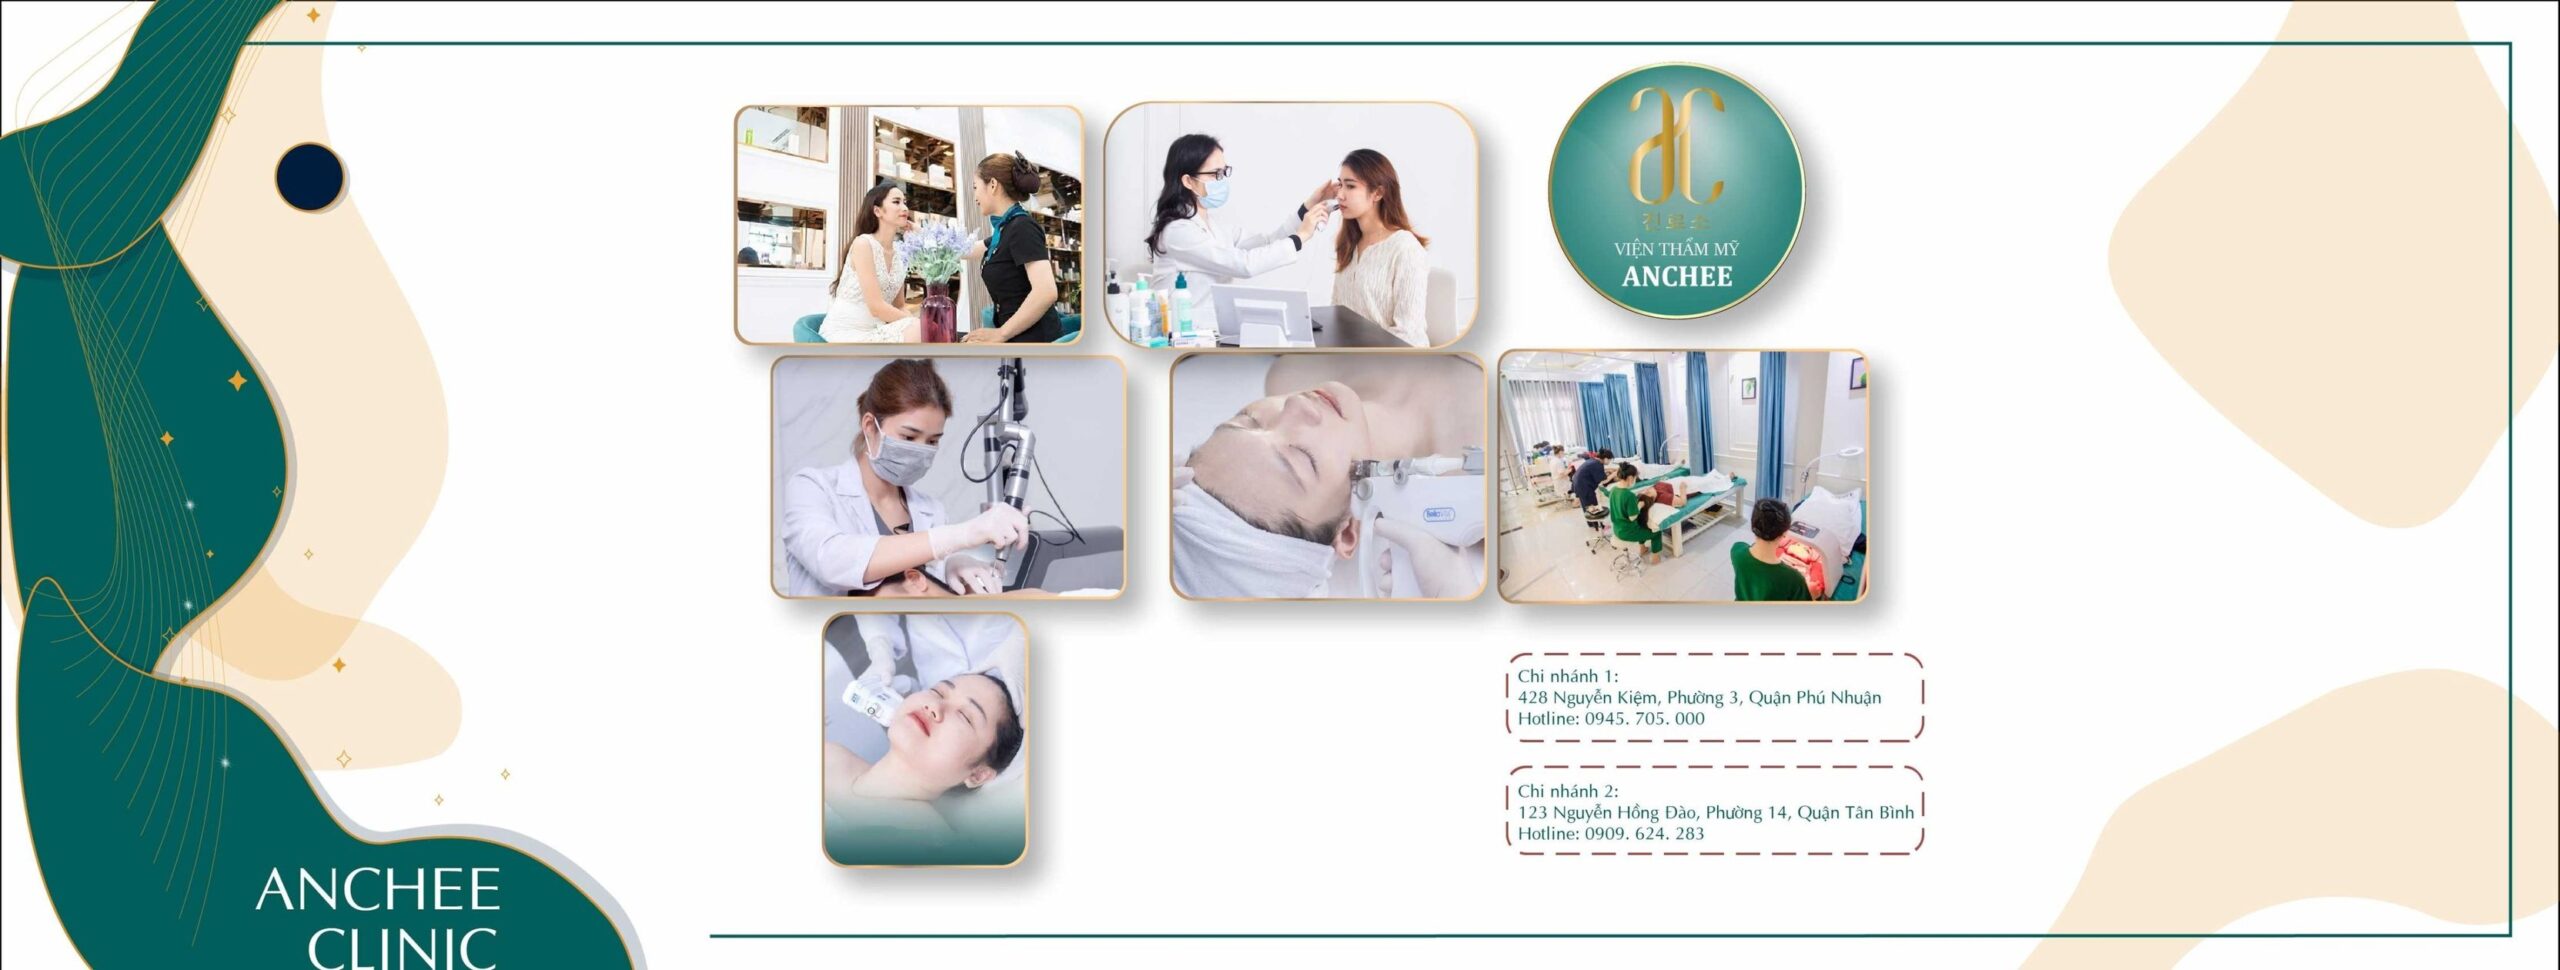 Anchee Spa & Clinic